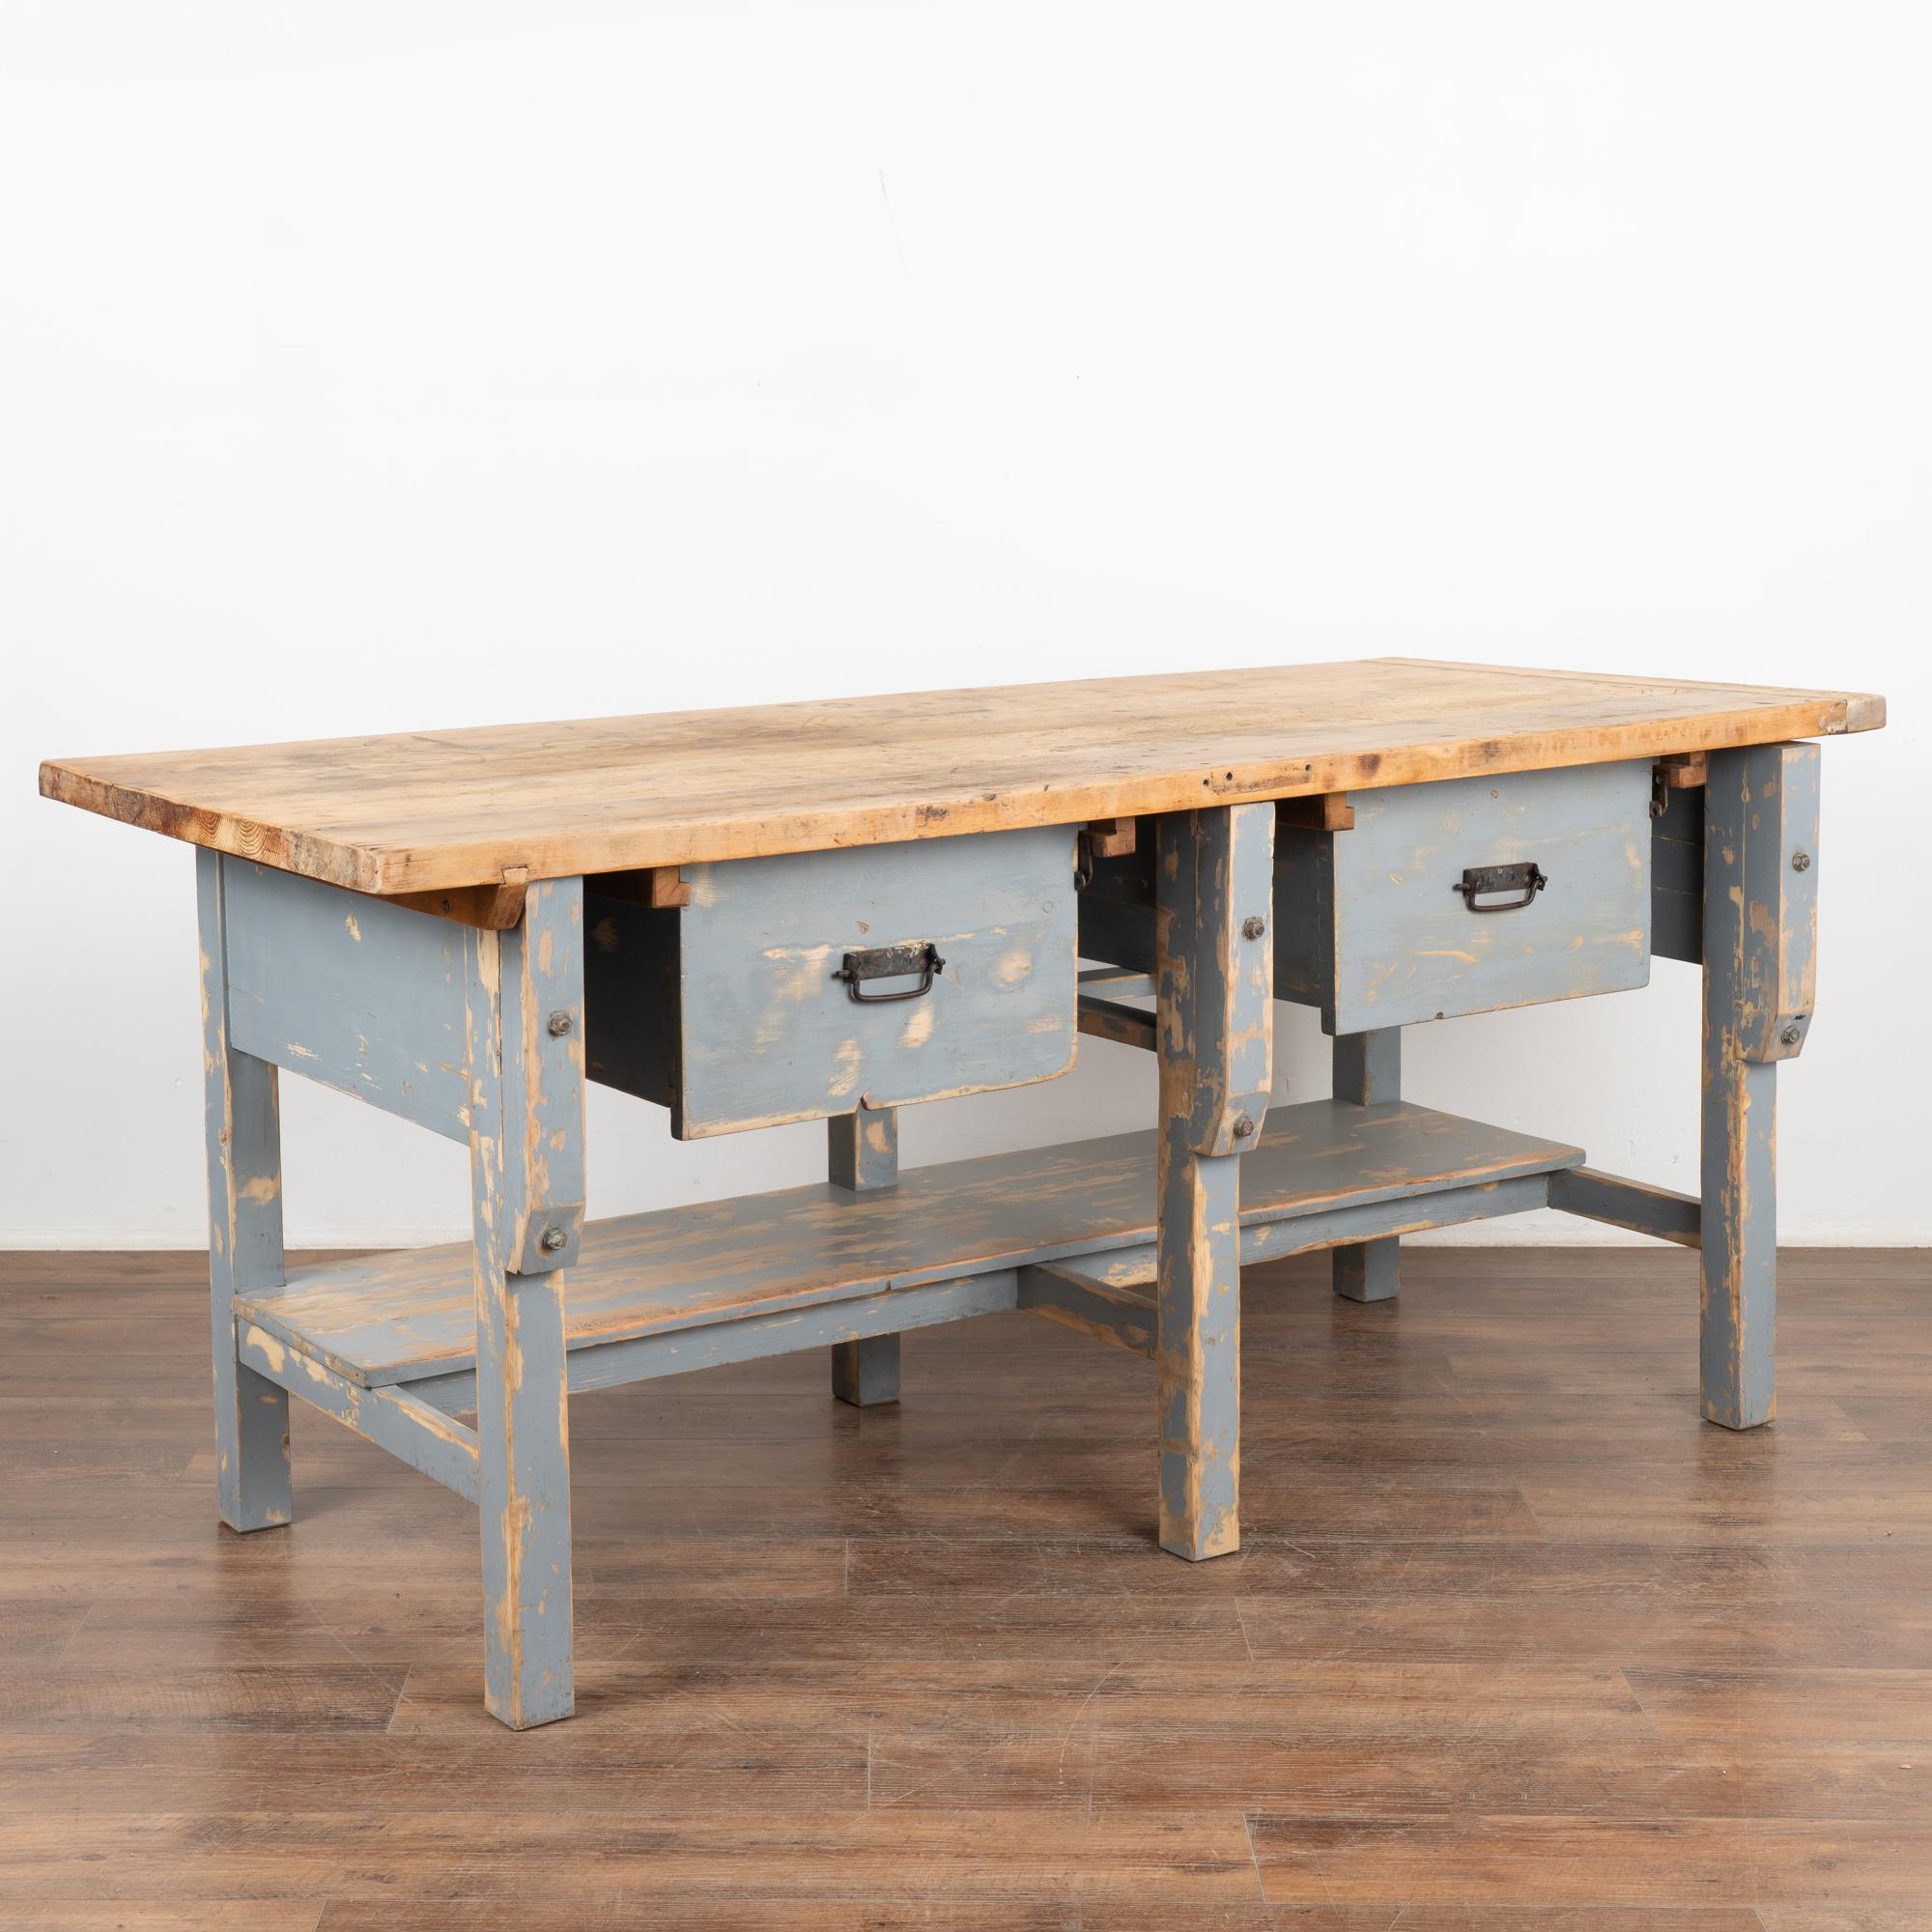 Rustic work table or shop counter with two large drawers and lower shelf. The blue painted finish has been distressed throughout the base. 
This heavily used 6' table reflects generations of use in every gouge, nick, scratch, stain and small holes